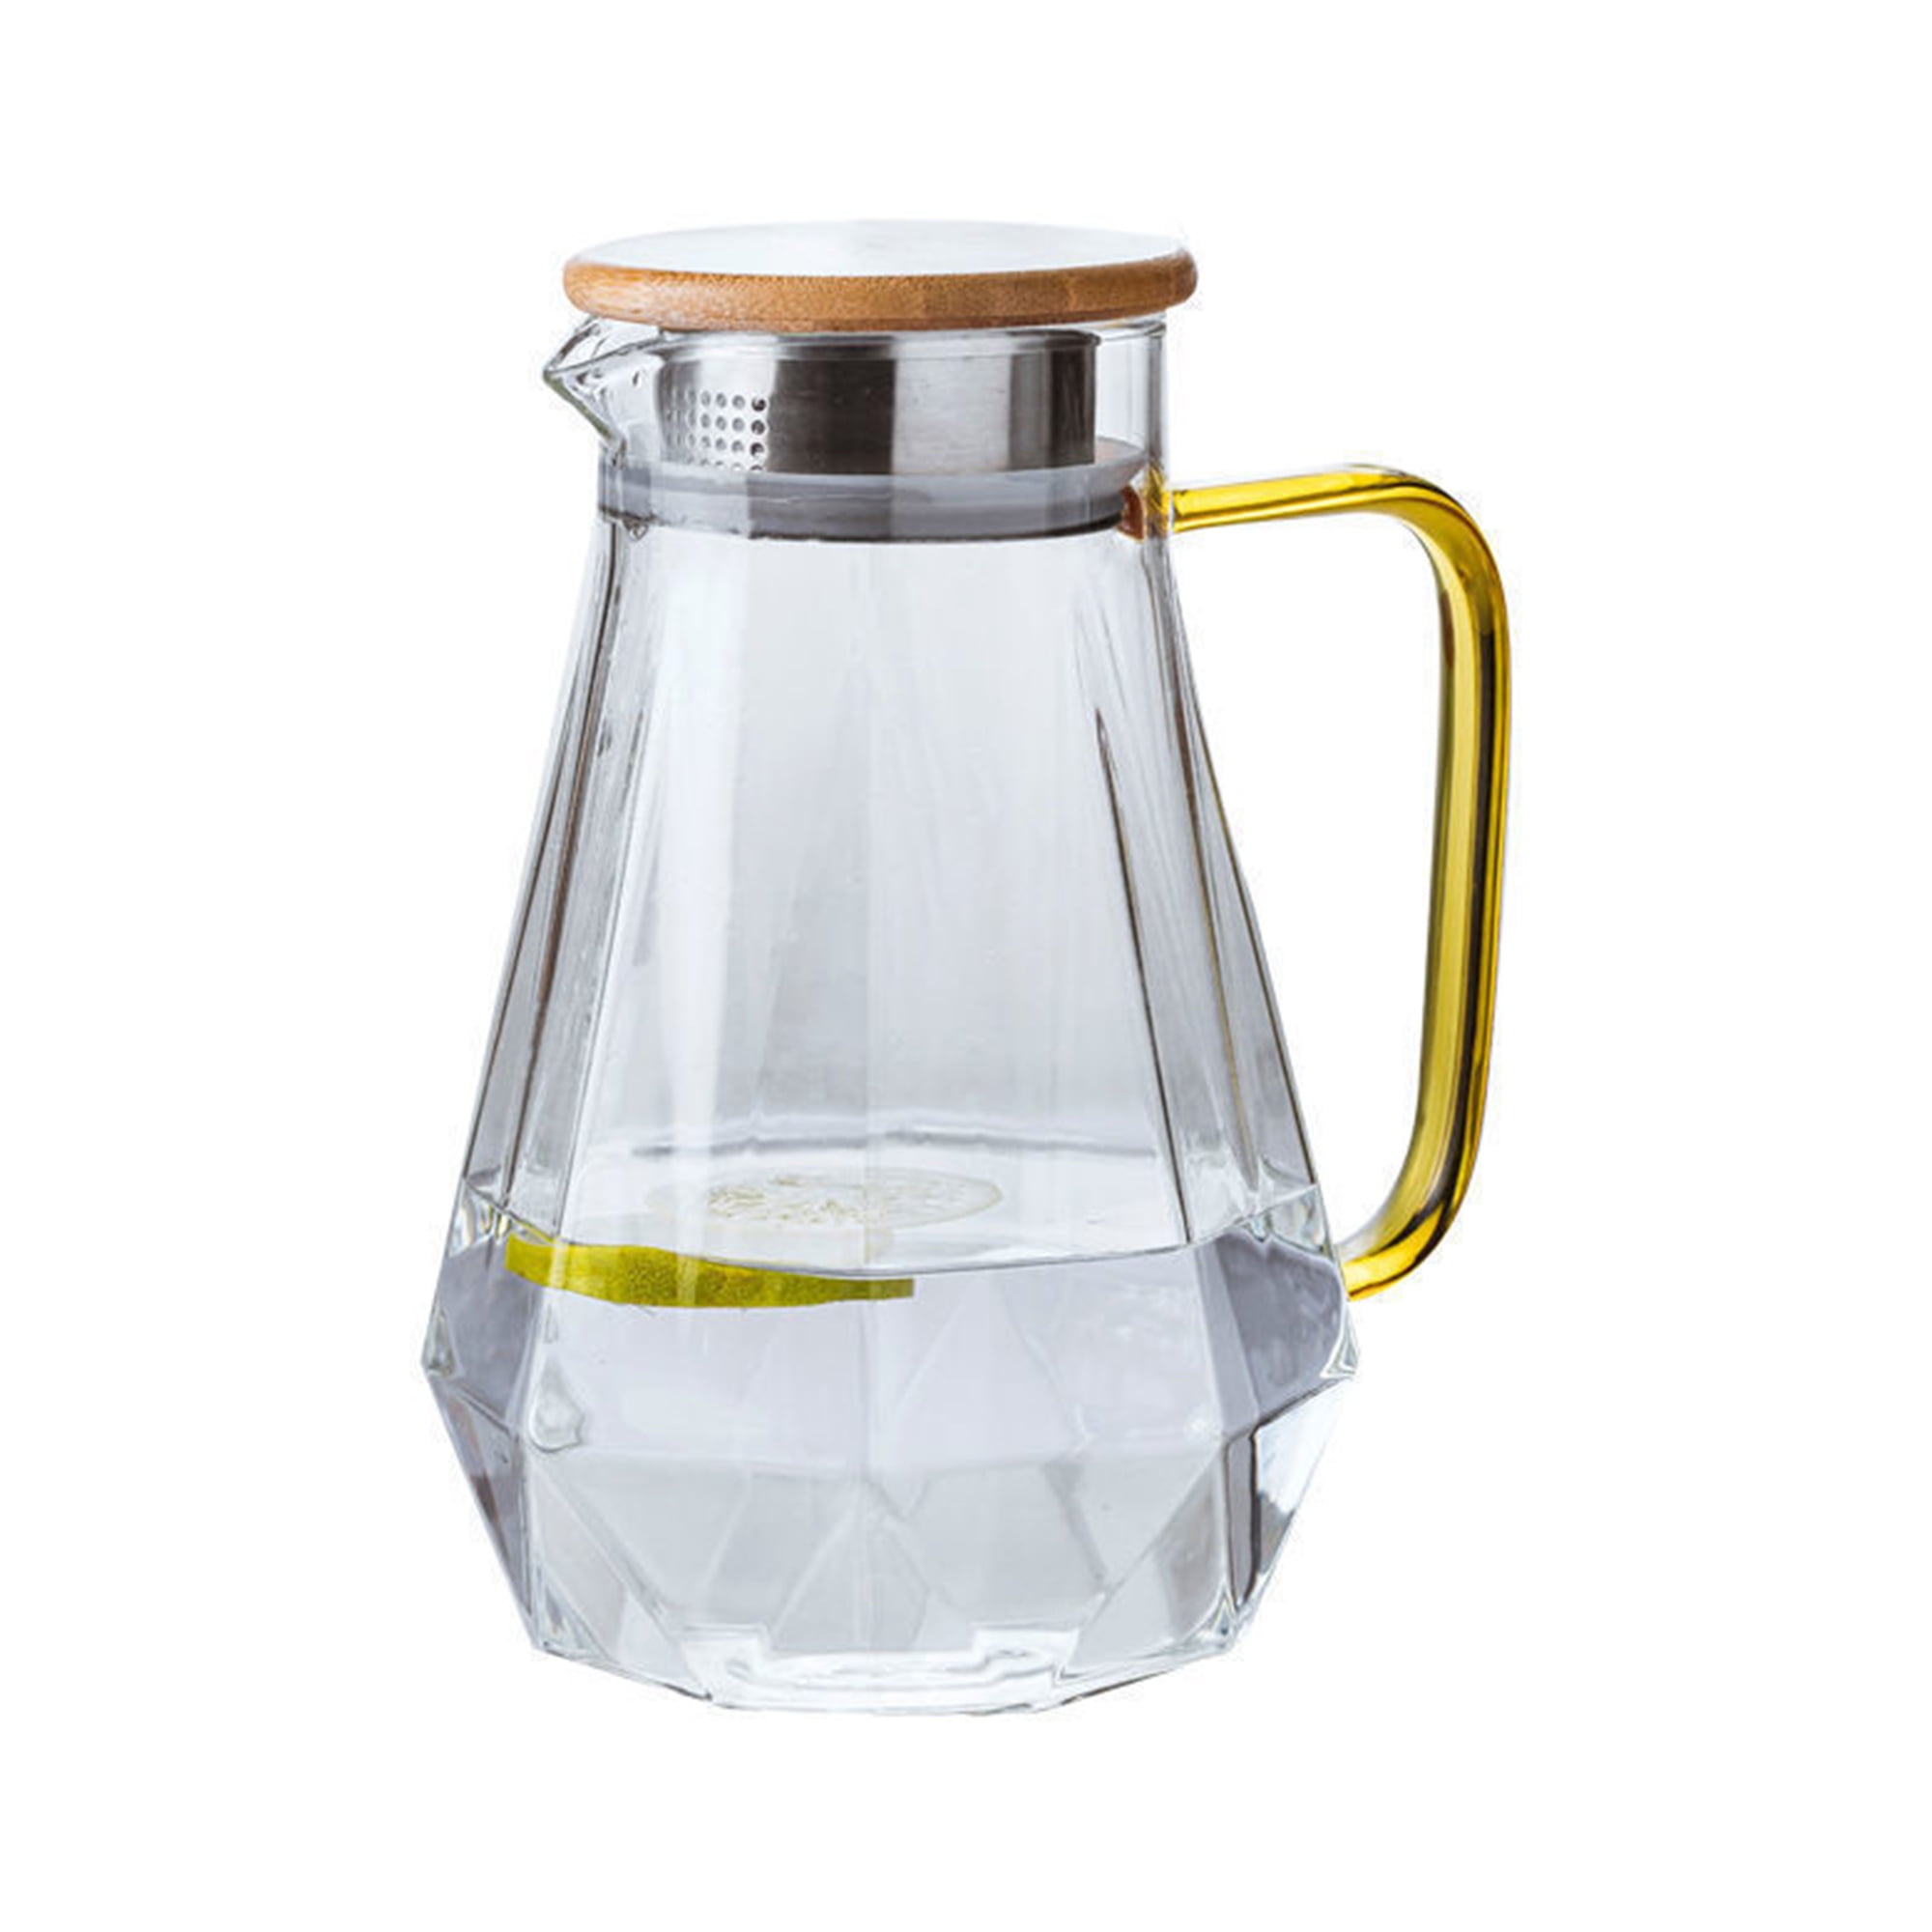 DUJUST Glass Pitcher Set (68 oz) with 4 Cups & 1 Tray, Elegant Diamond  Design Water Pitcher with Handle, High Durability Glass Jug for Fridge,  Glass